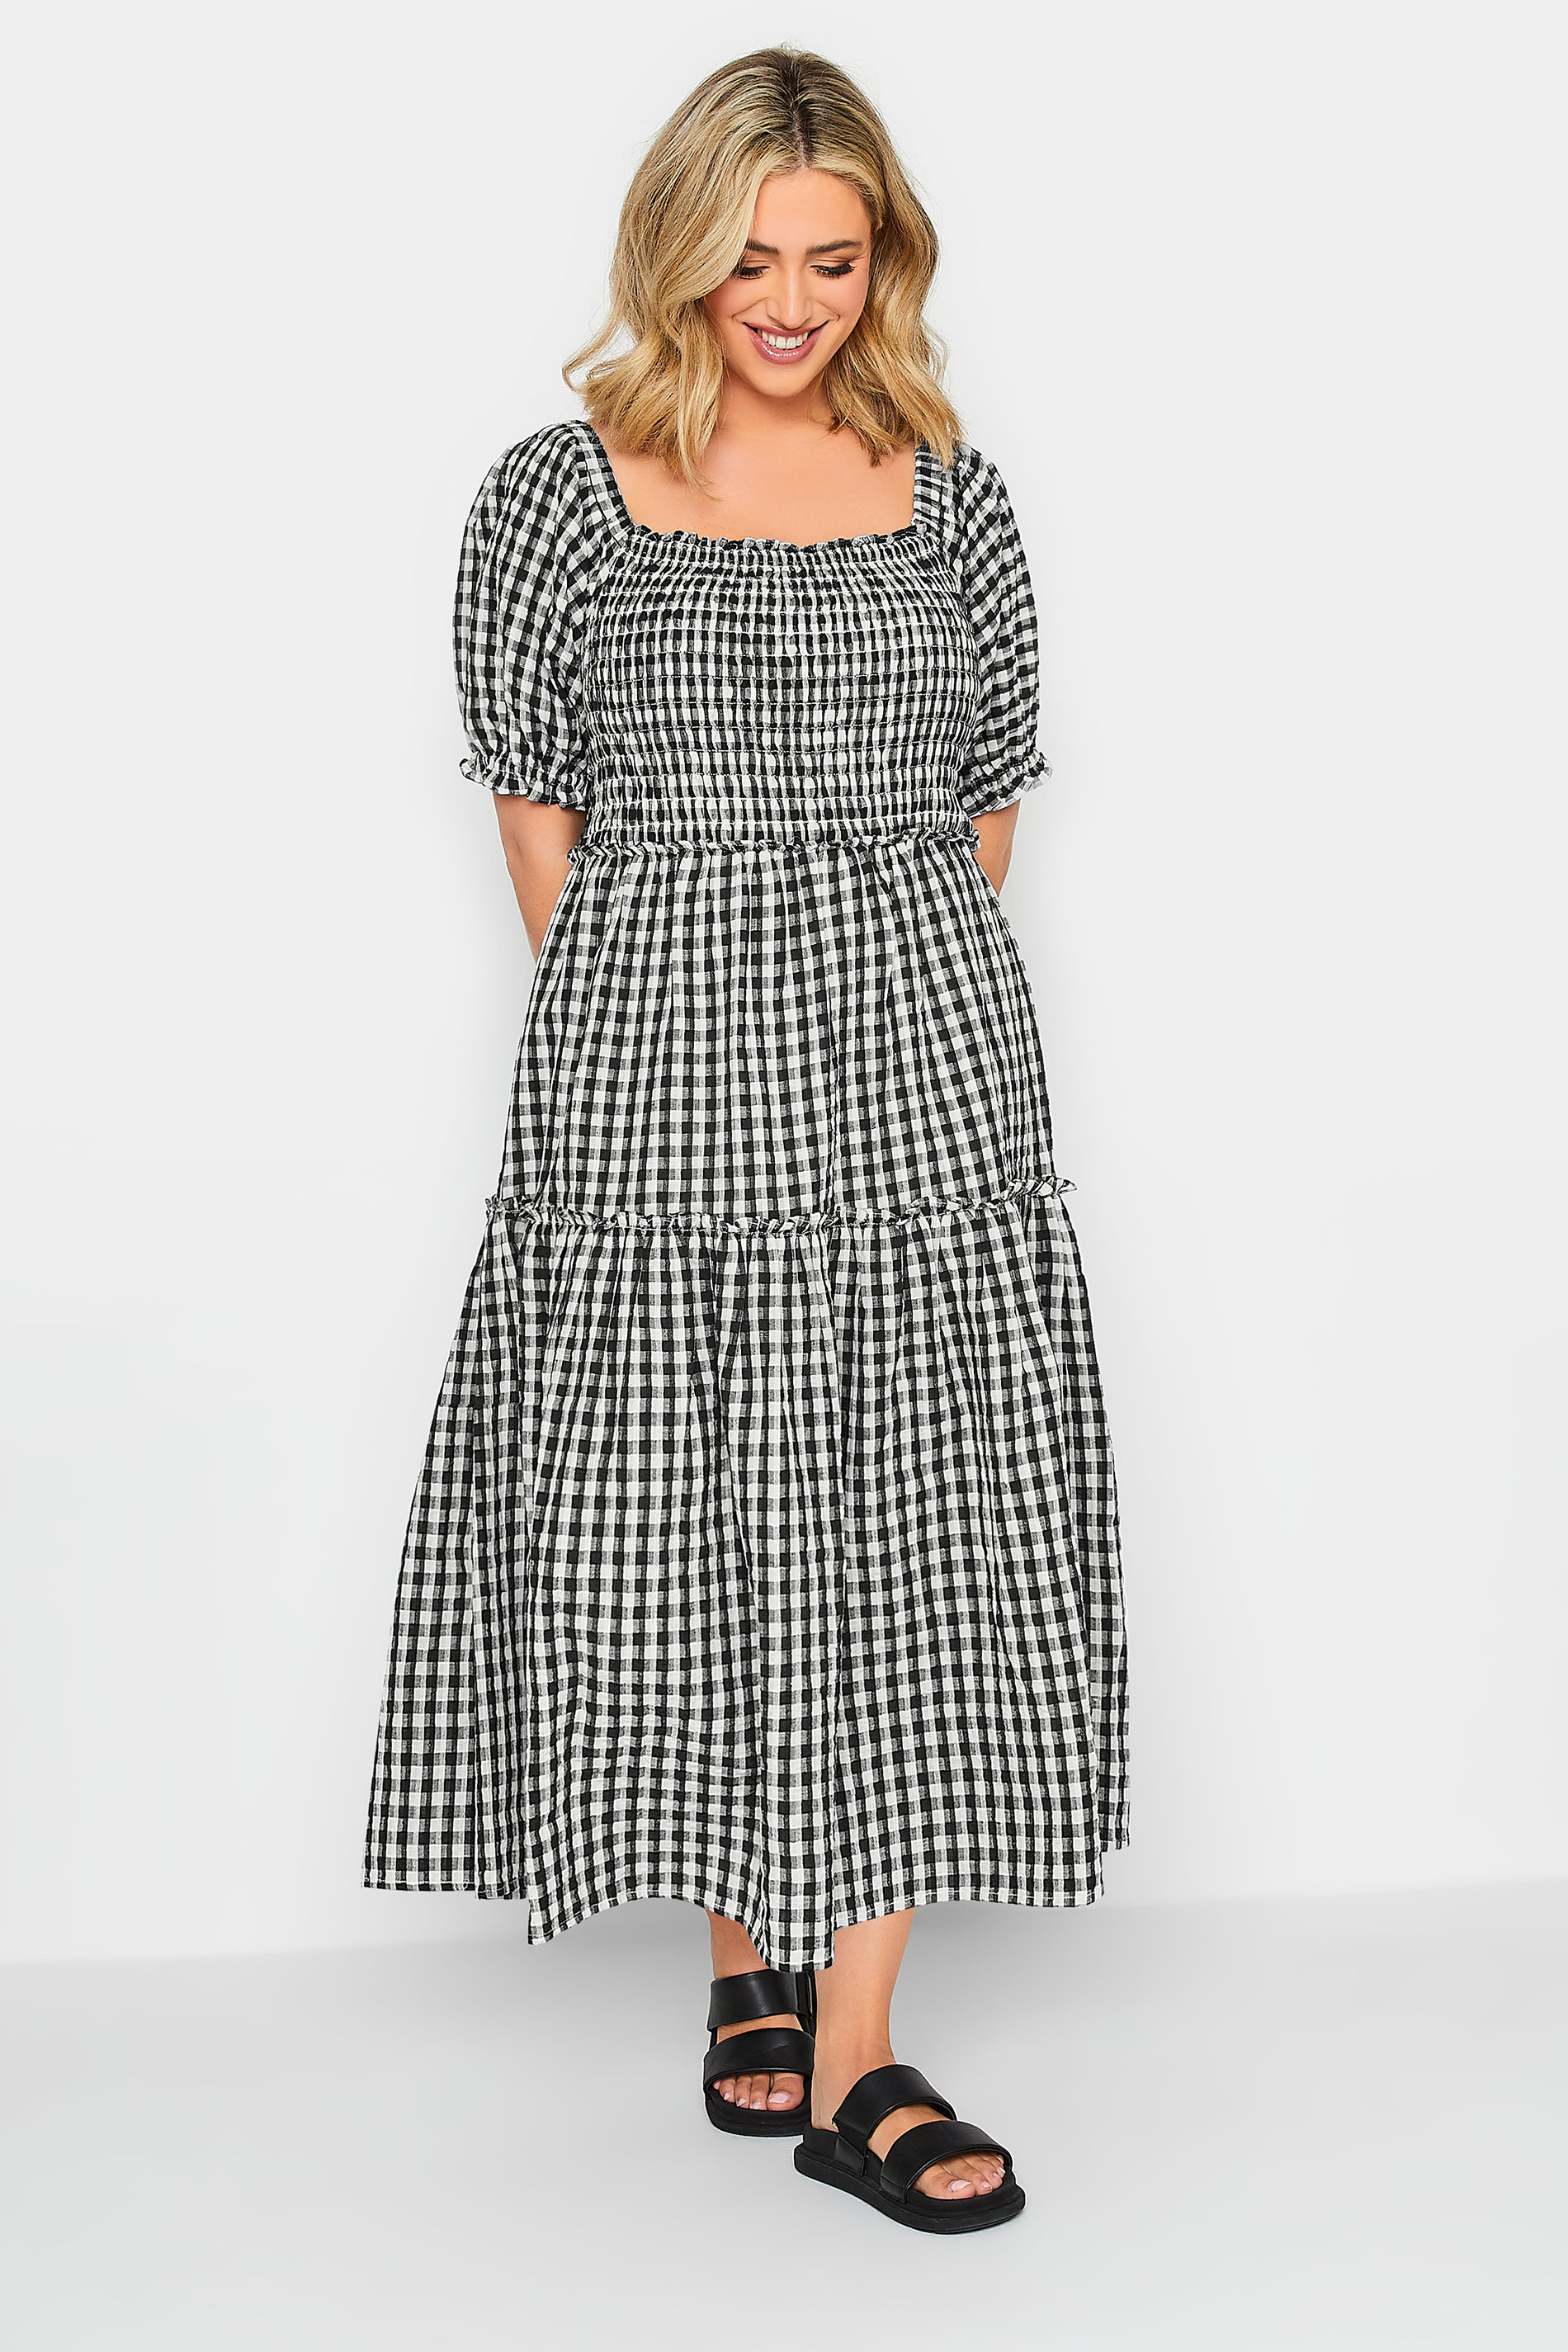 YOURS PETITE Plus Size Black Gingham Print Shirred Midaxi Dress | Yours Clothing 2